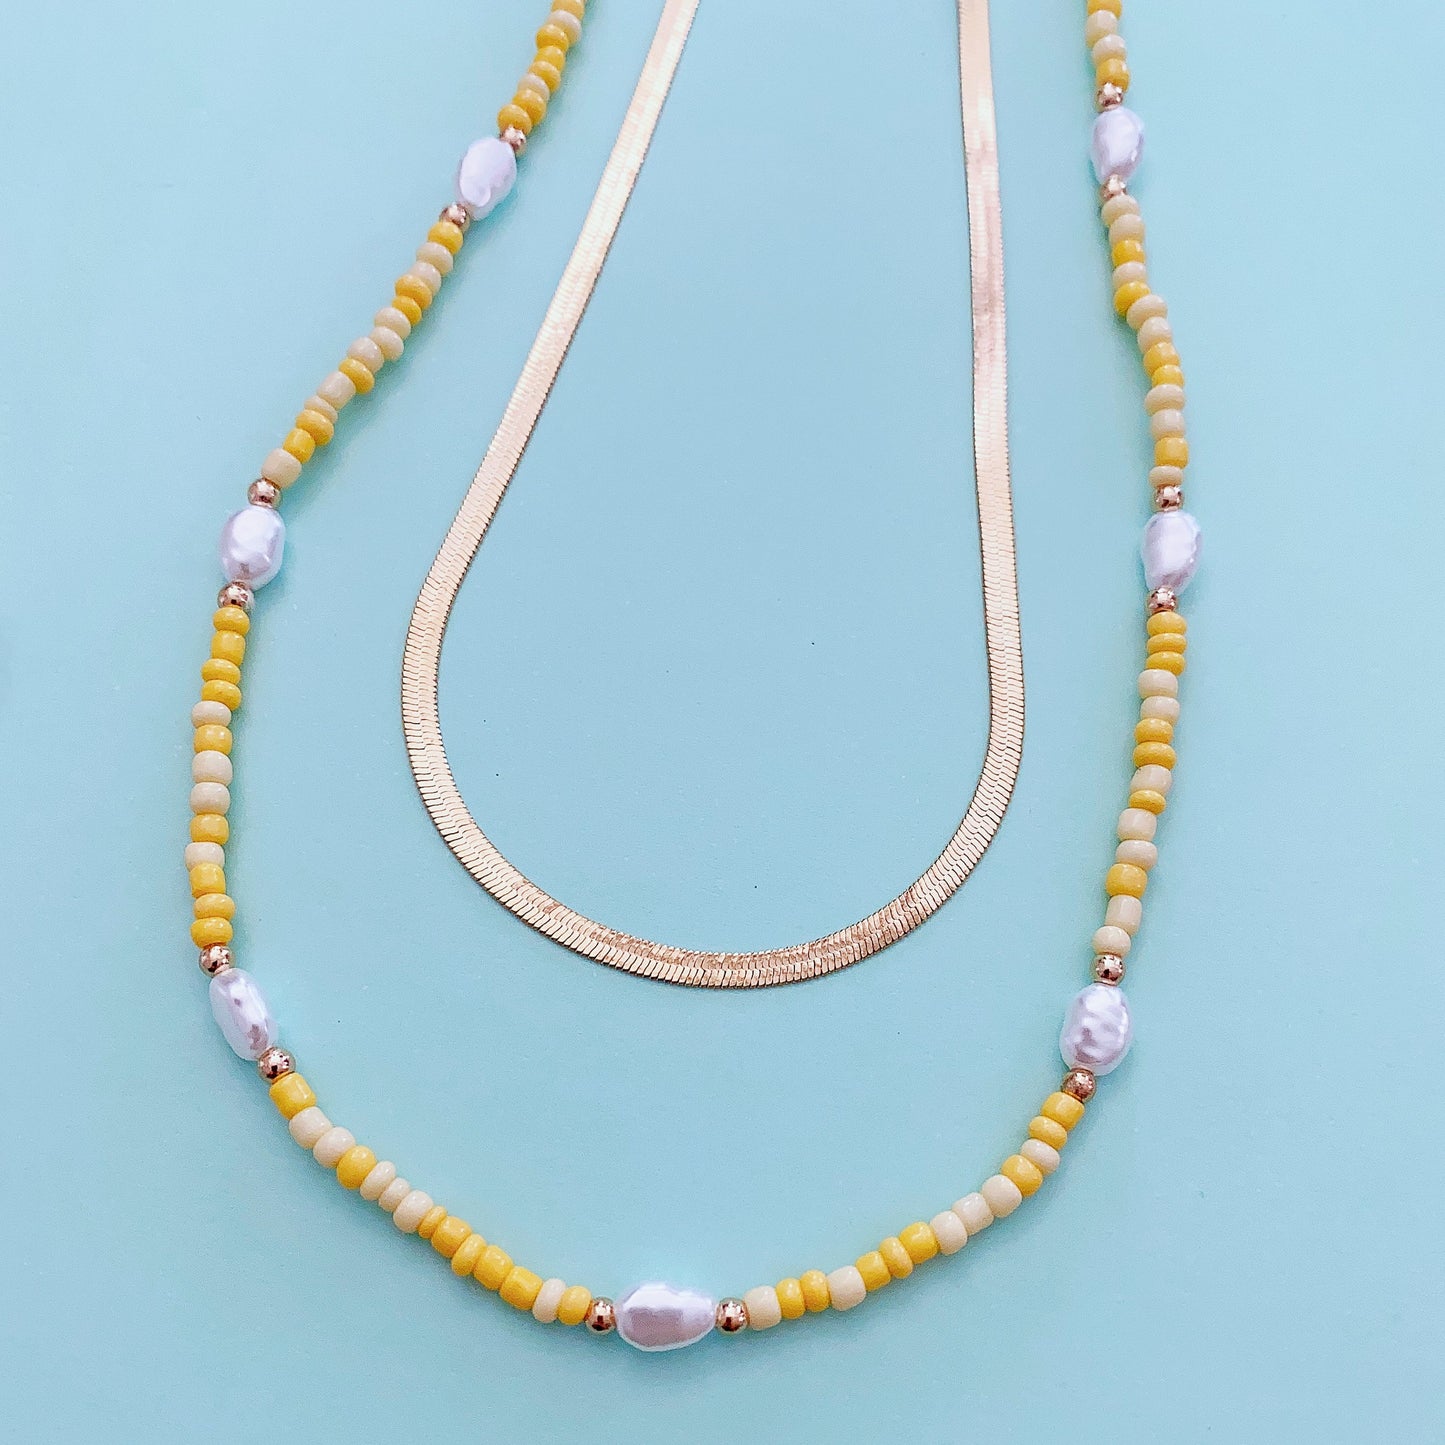 Gold-tone 2-layer beaded charm necklace